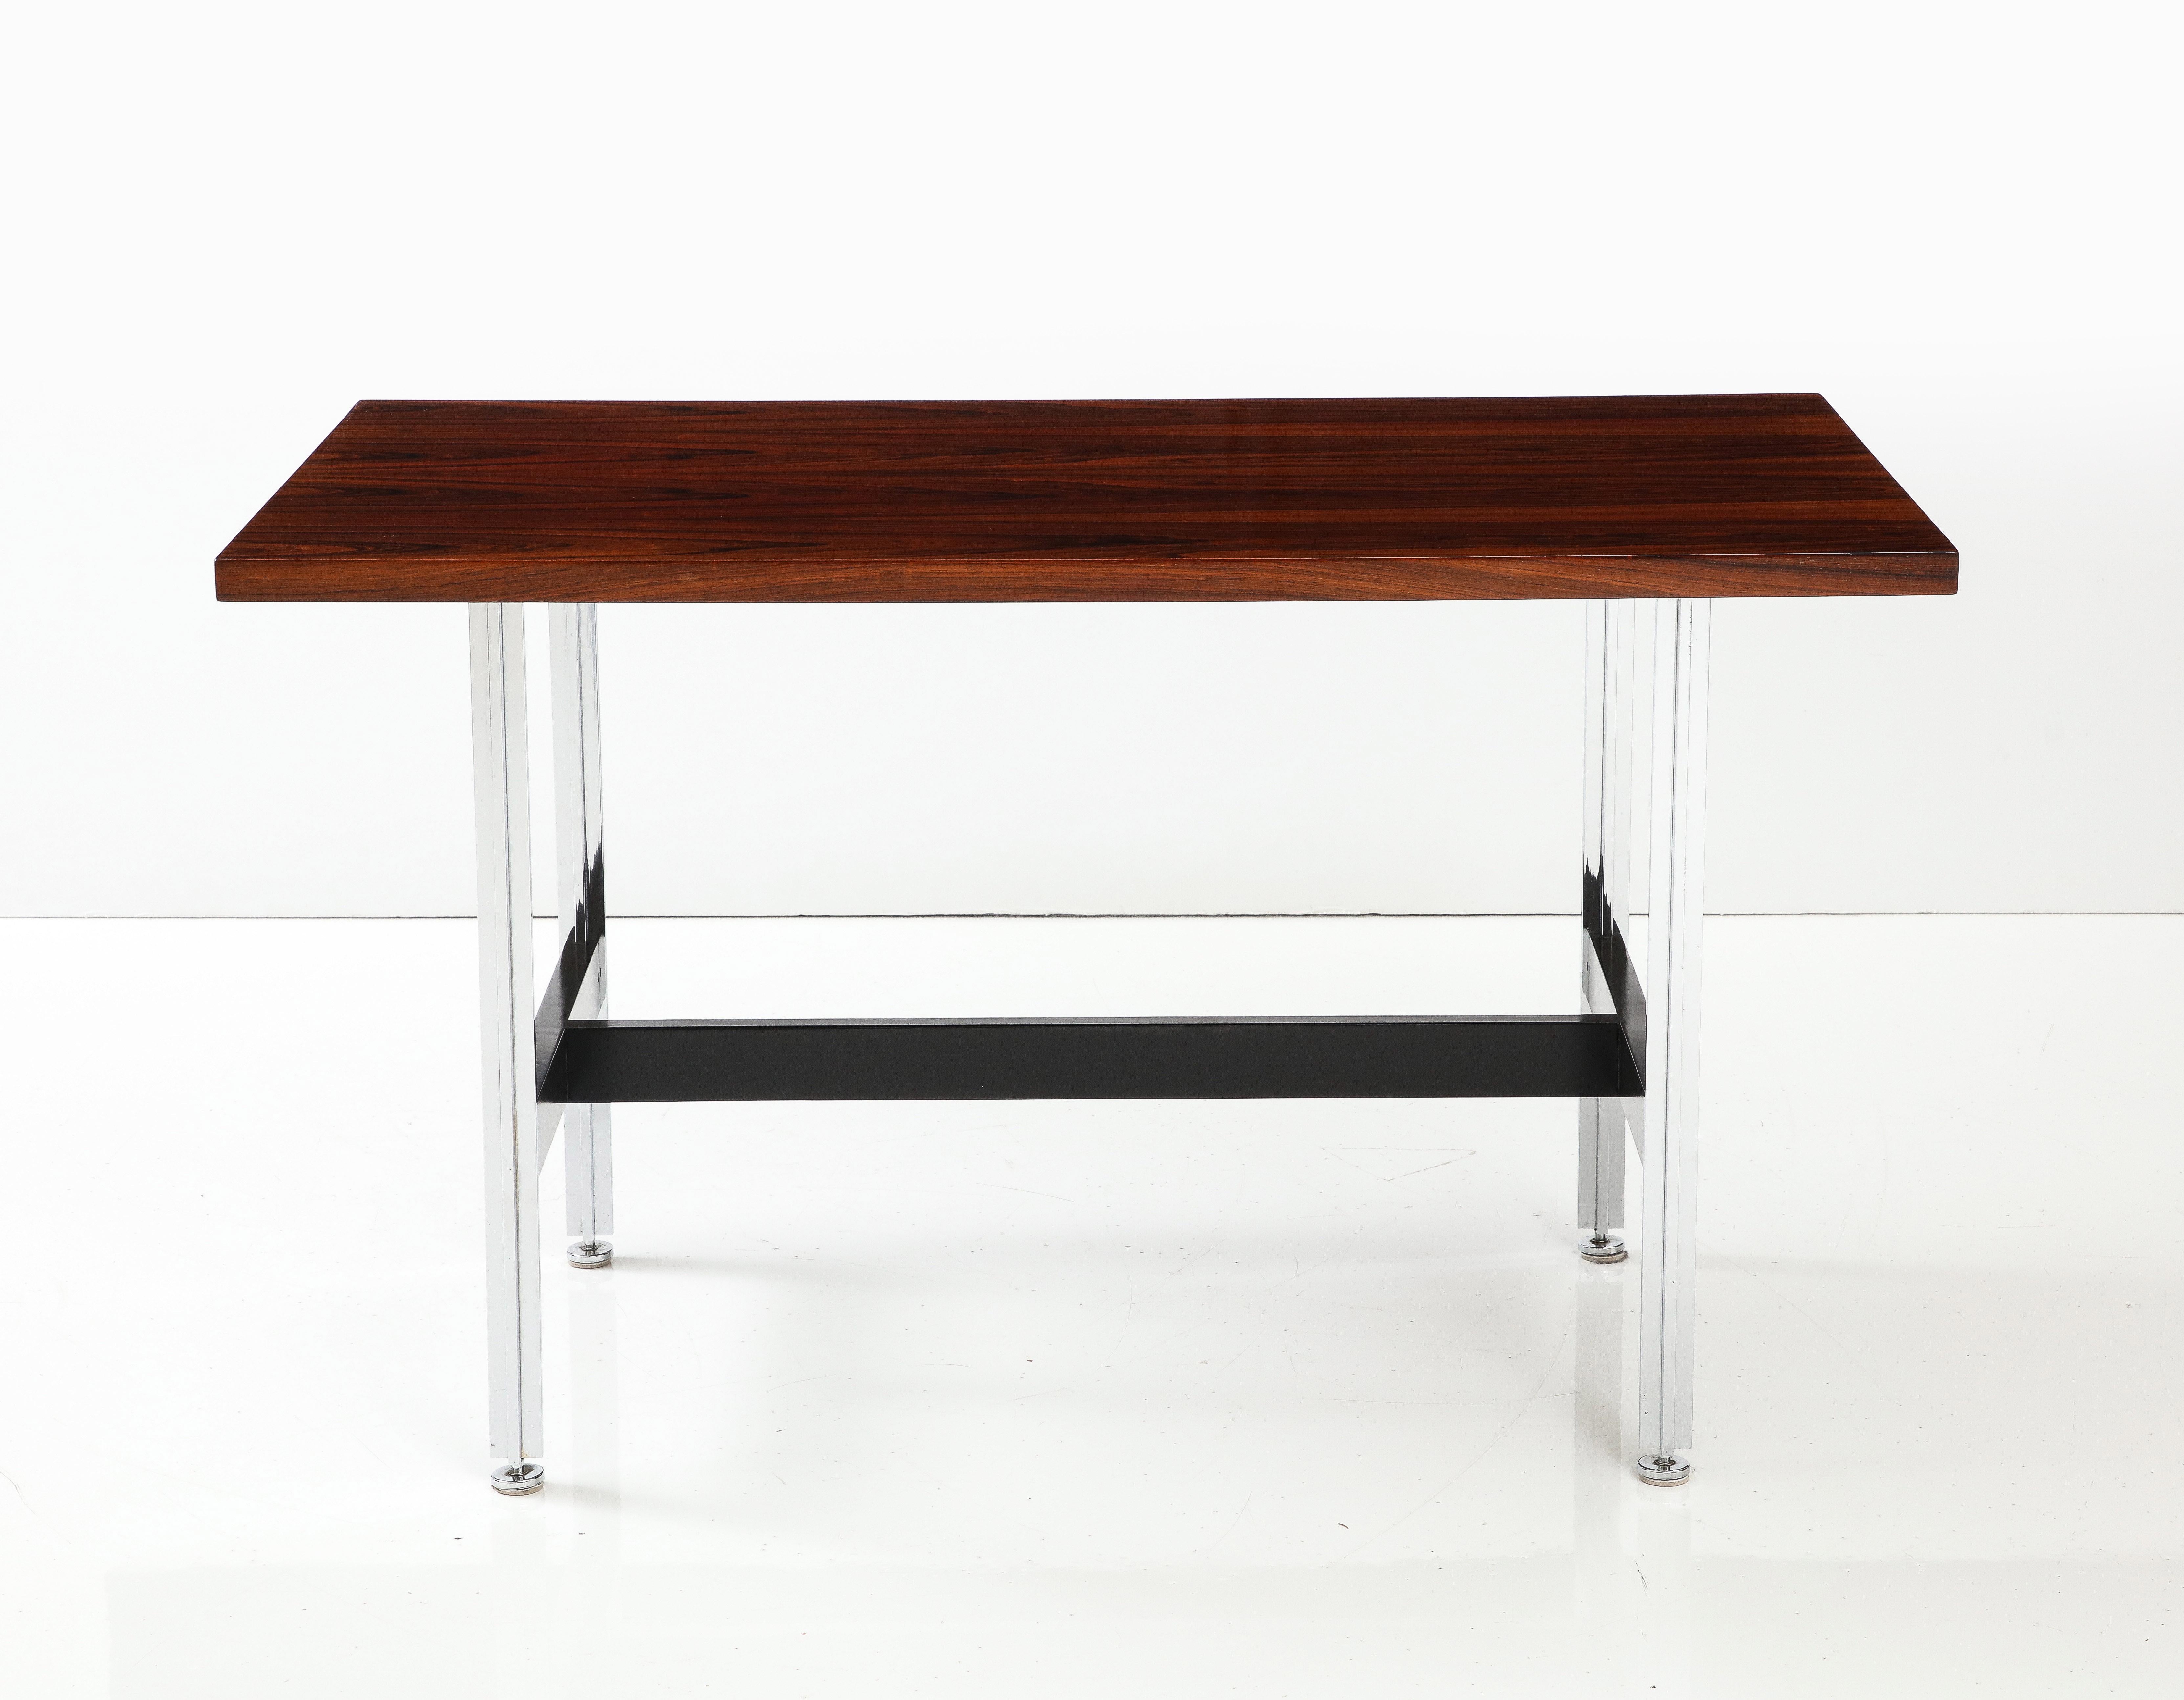 Beautiful 1970's mid-century modern Brazilian rosewood steel and lacquer desk or dining table by John Stuart, fully restored with minor wear and patina due to age and use.